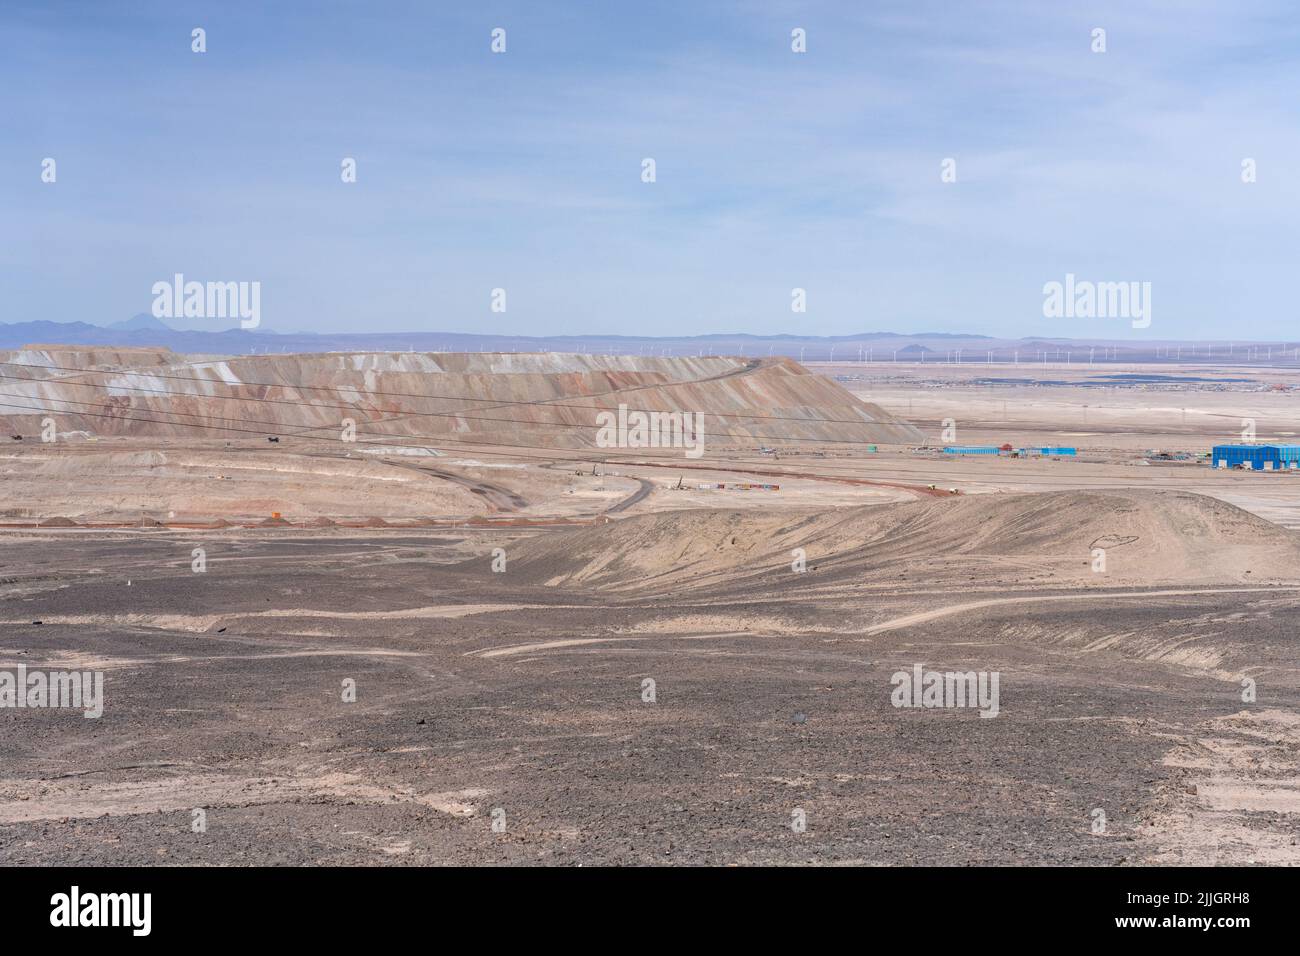 Mine tailings pile behind the Division Ministro Hales or DMH open pit copper mine at Chuquicamata, Chile. Stock Photo